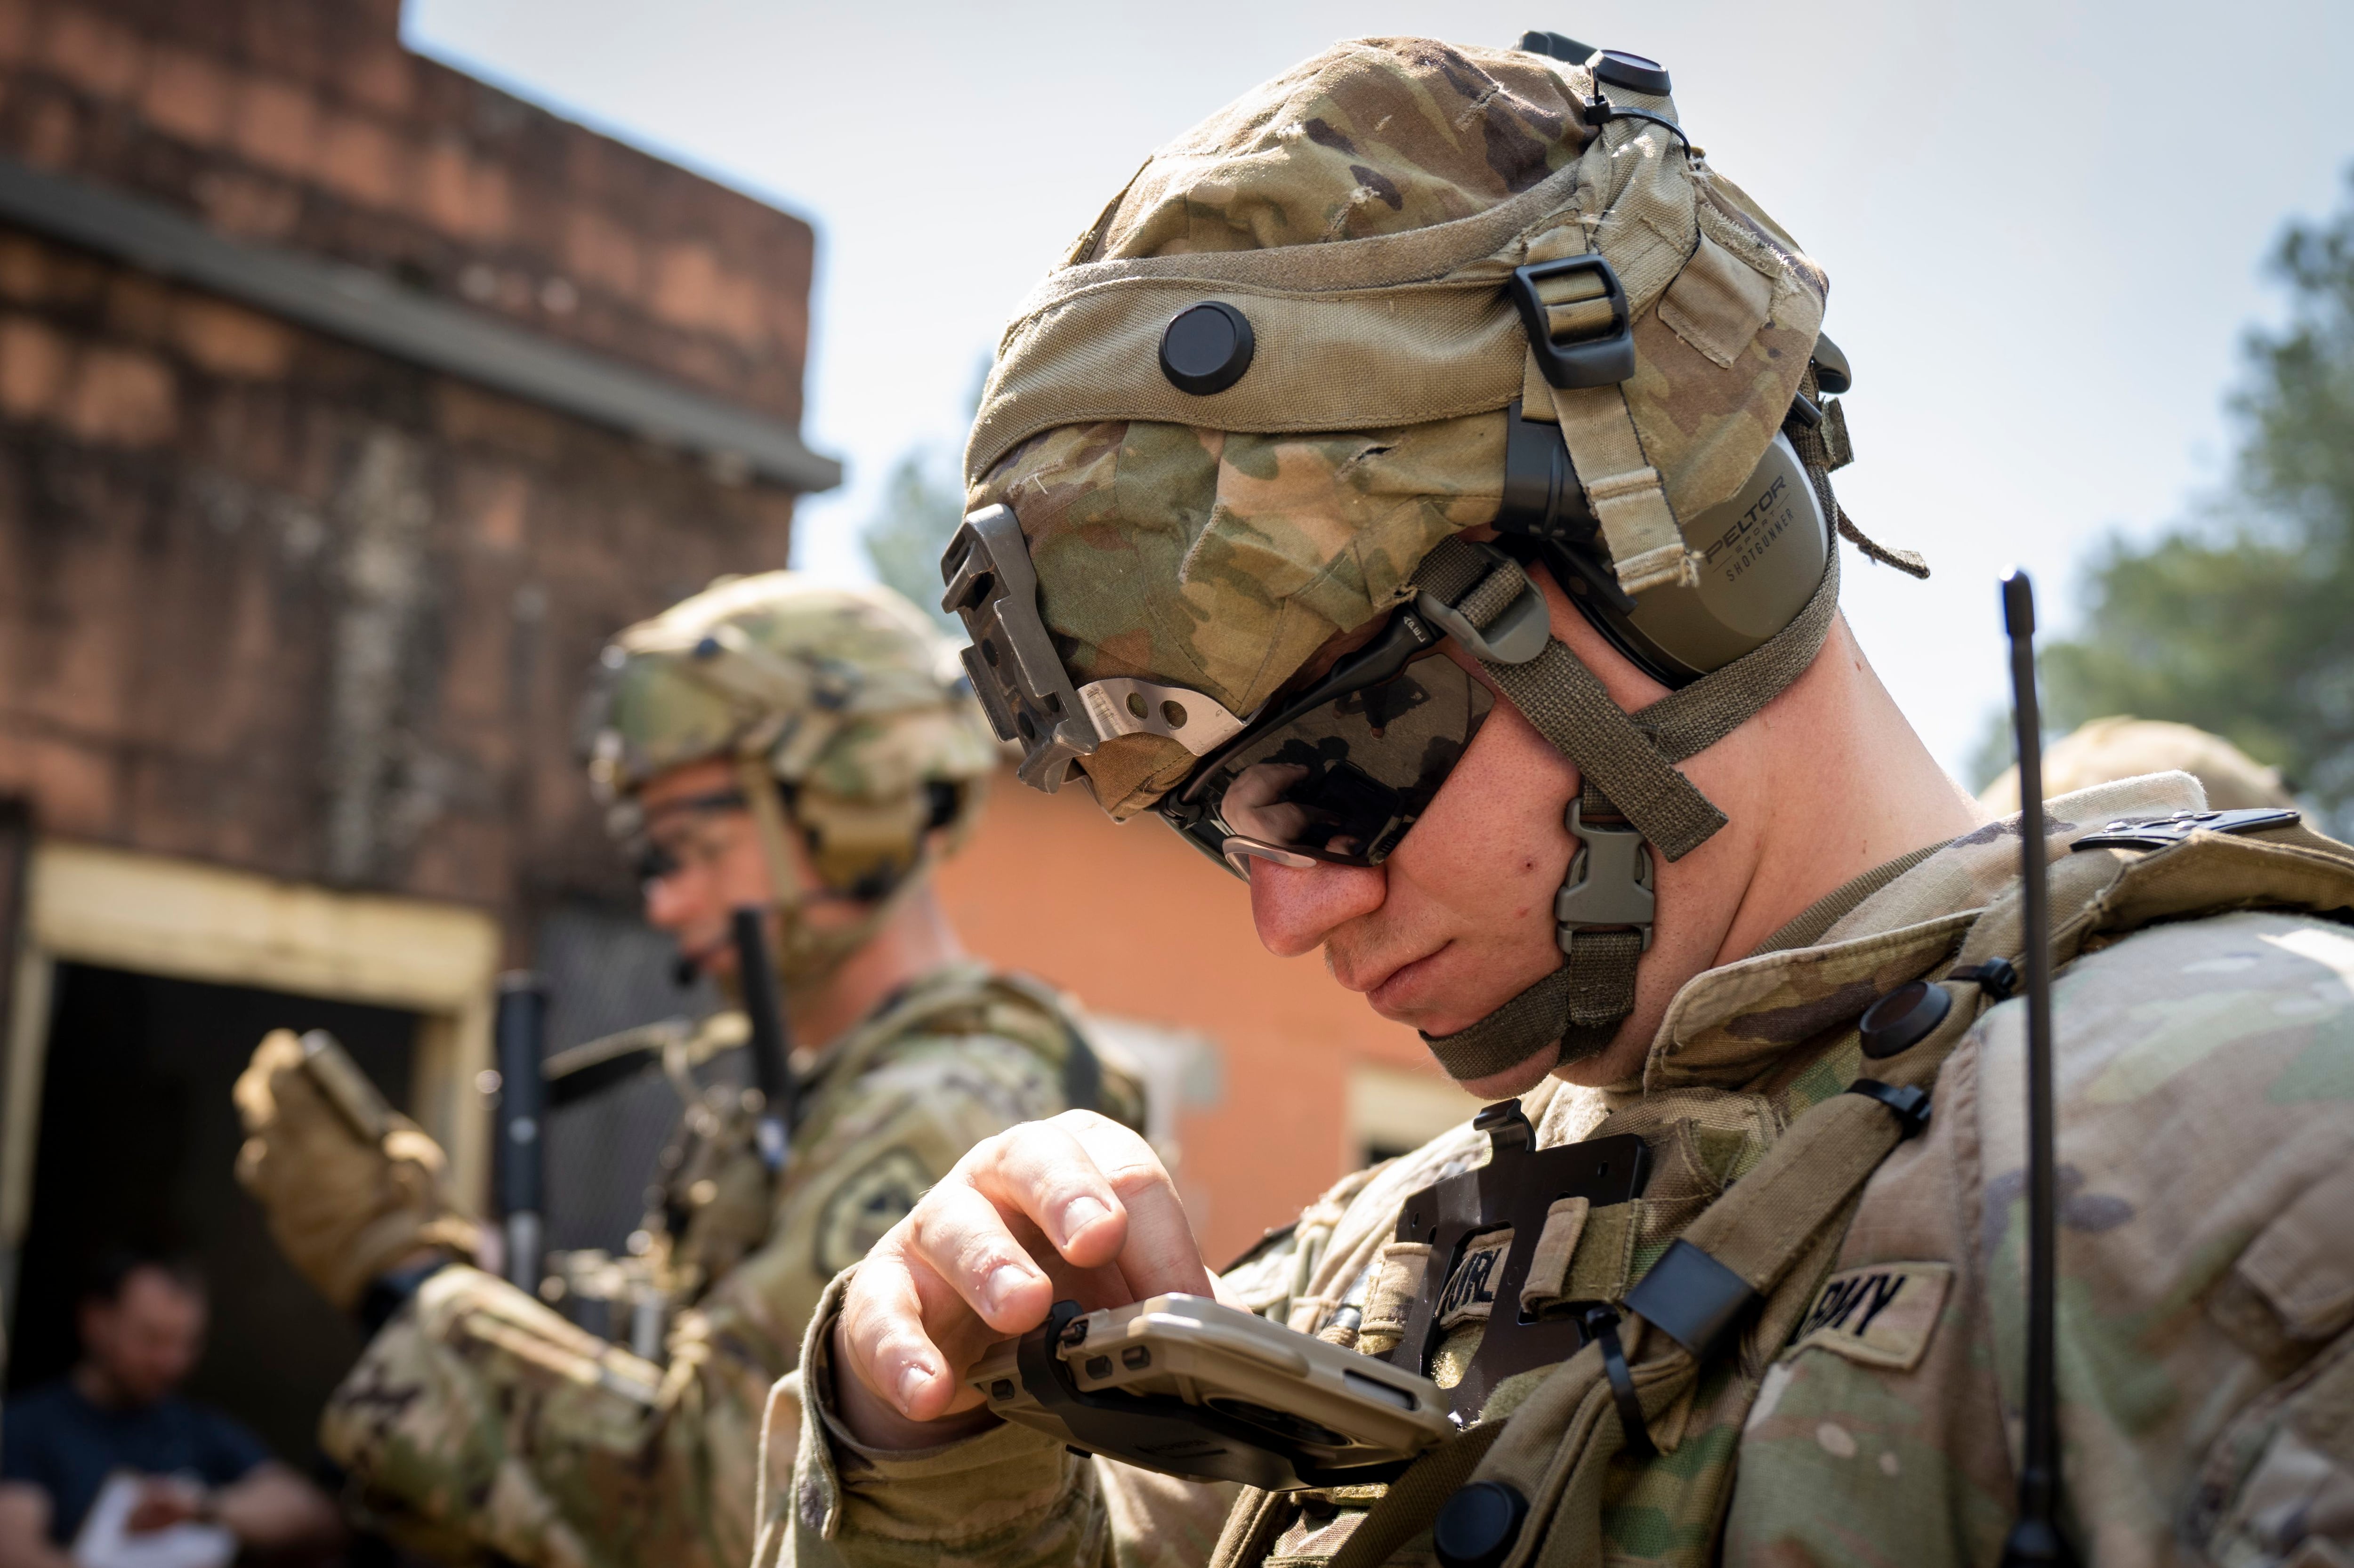 Soldiers check their Nett Warrior devices during a 2021 Army experiment held on Fort Benning, Ga. (Jason Amadi/U.S. Army)